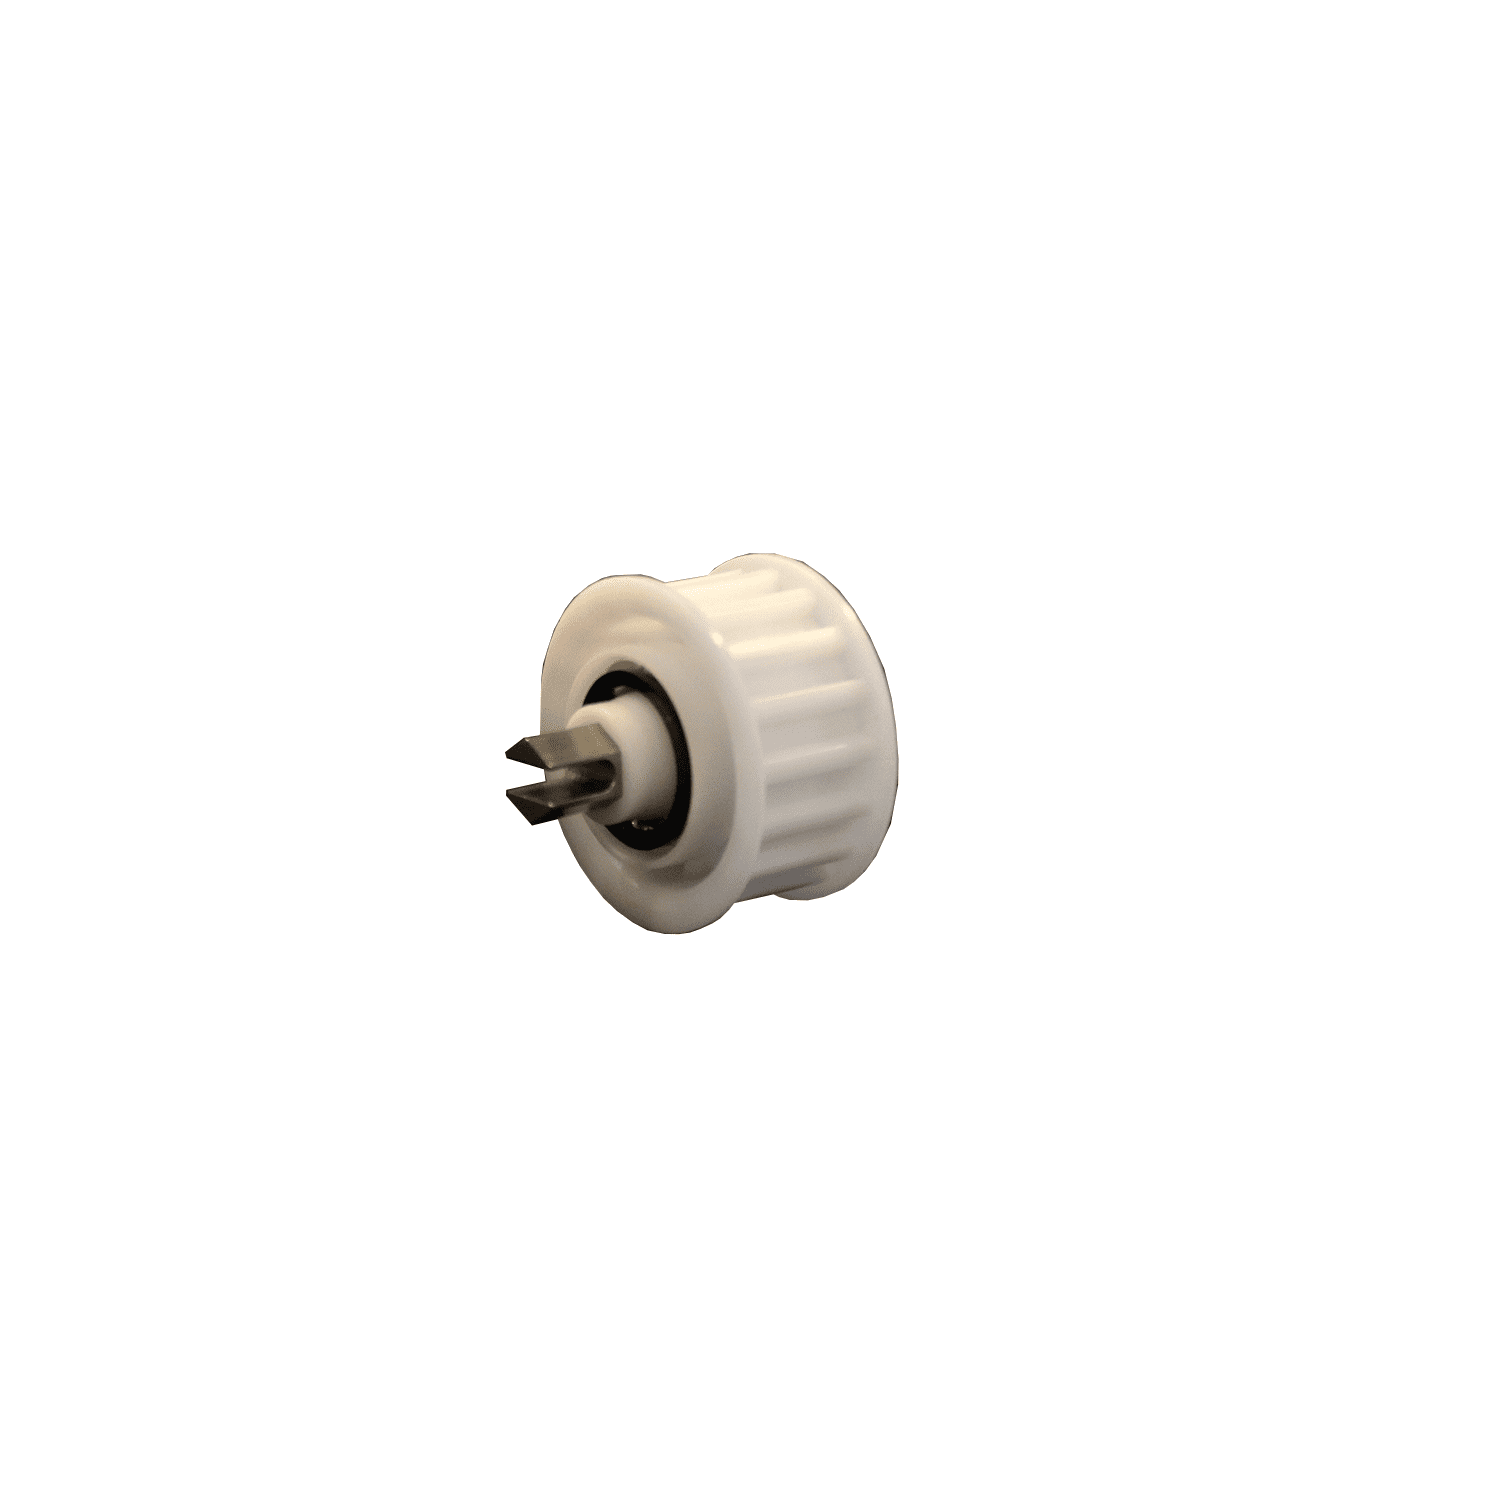 Flat Shaft Pulley - 3883645 - High-Quality and Durable Pulley